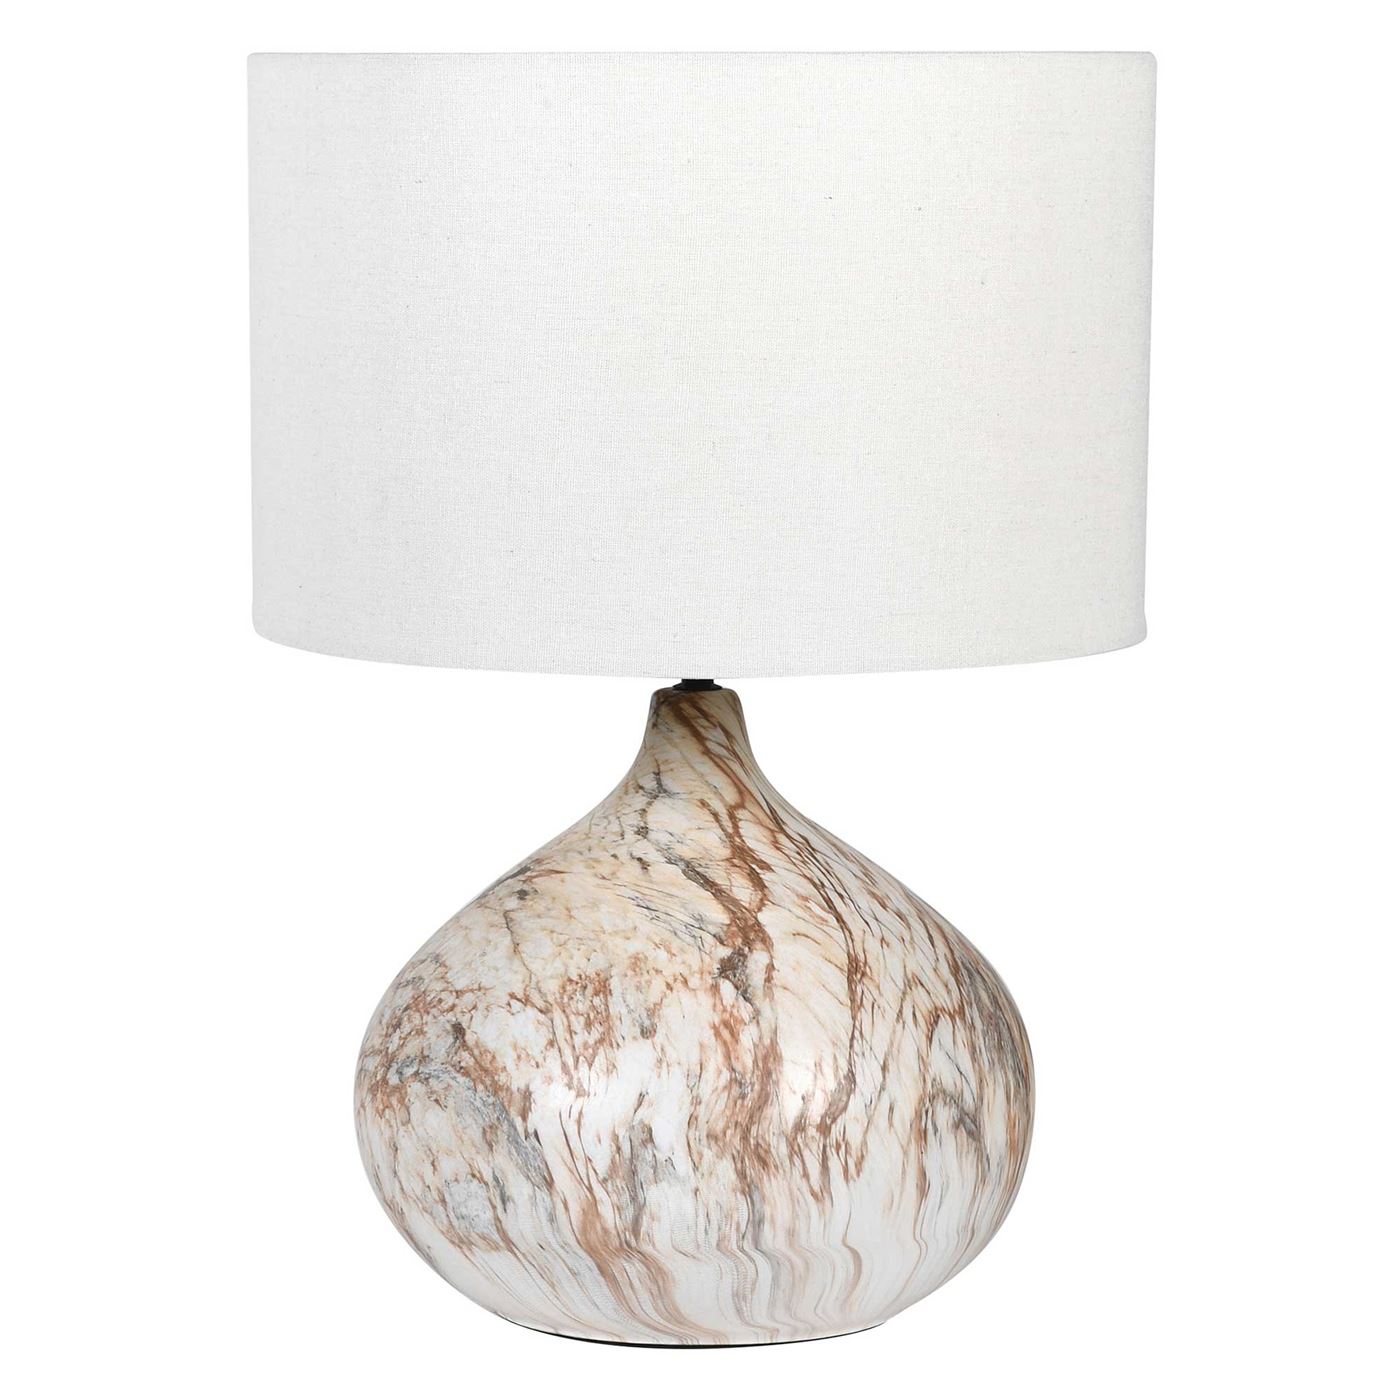 Marbled Table Lamp, Neutral Ceramic | Barker & Stonehouse